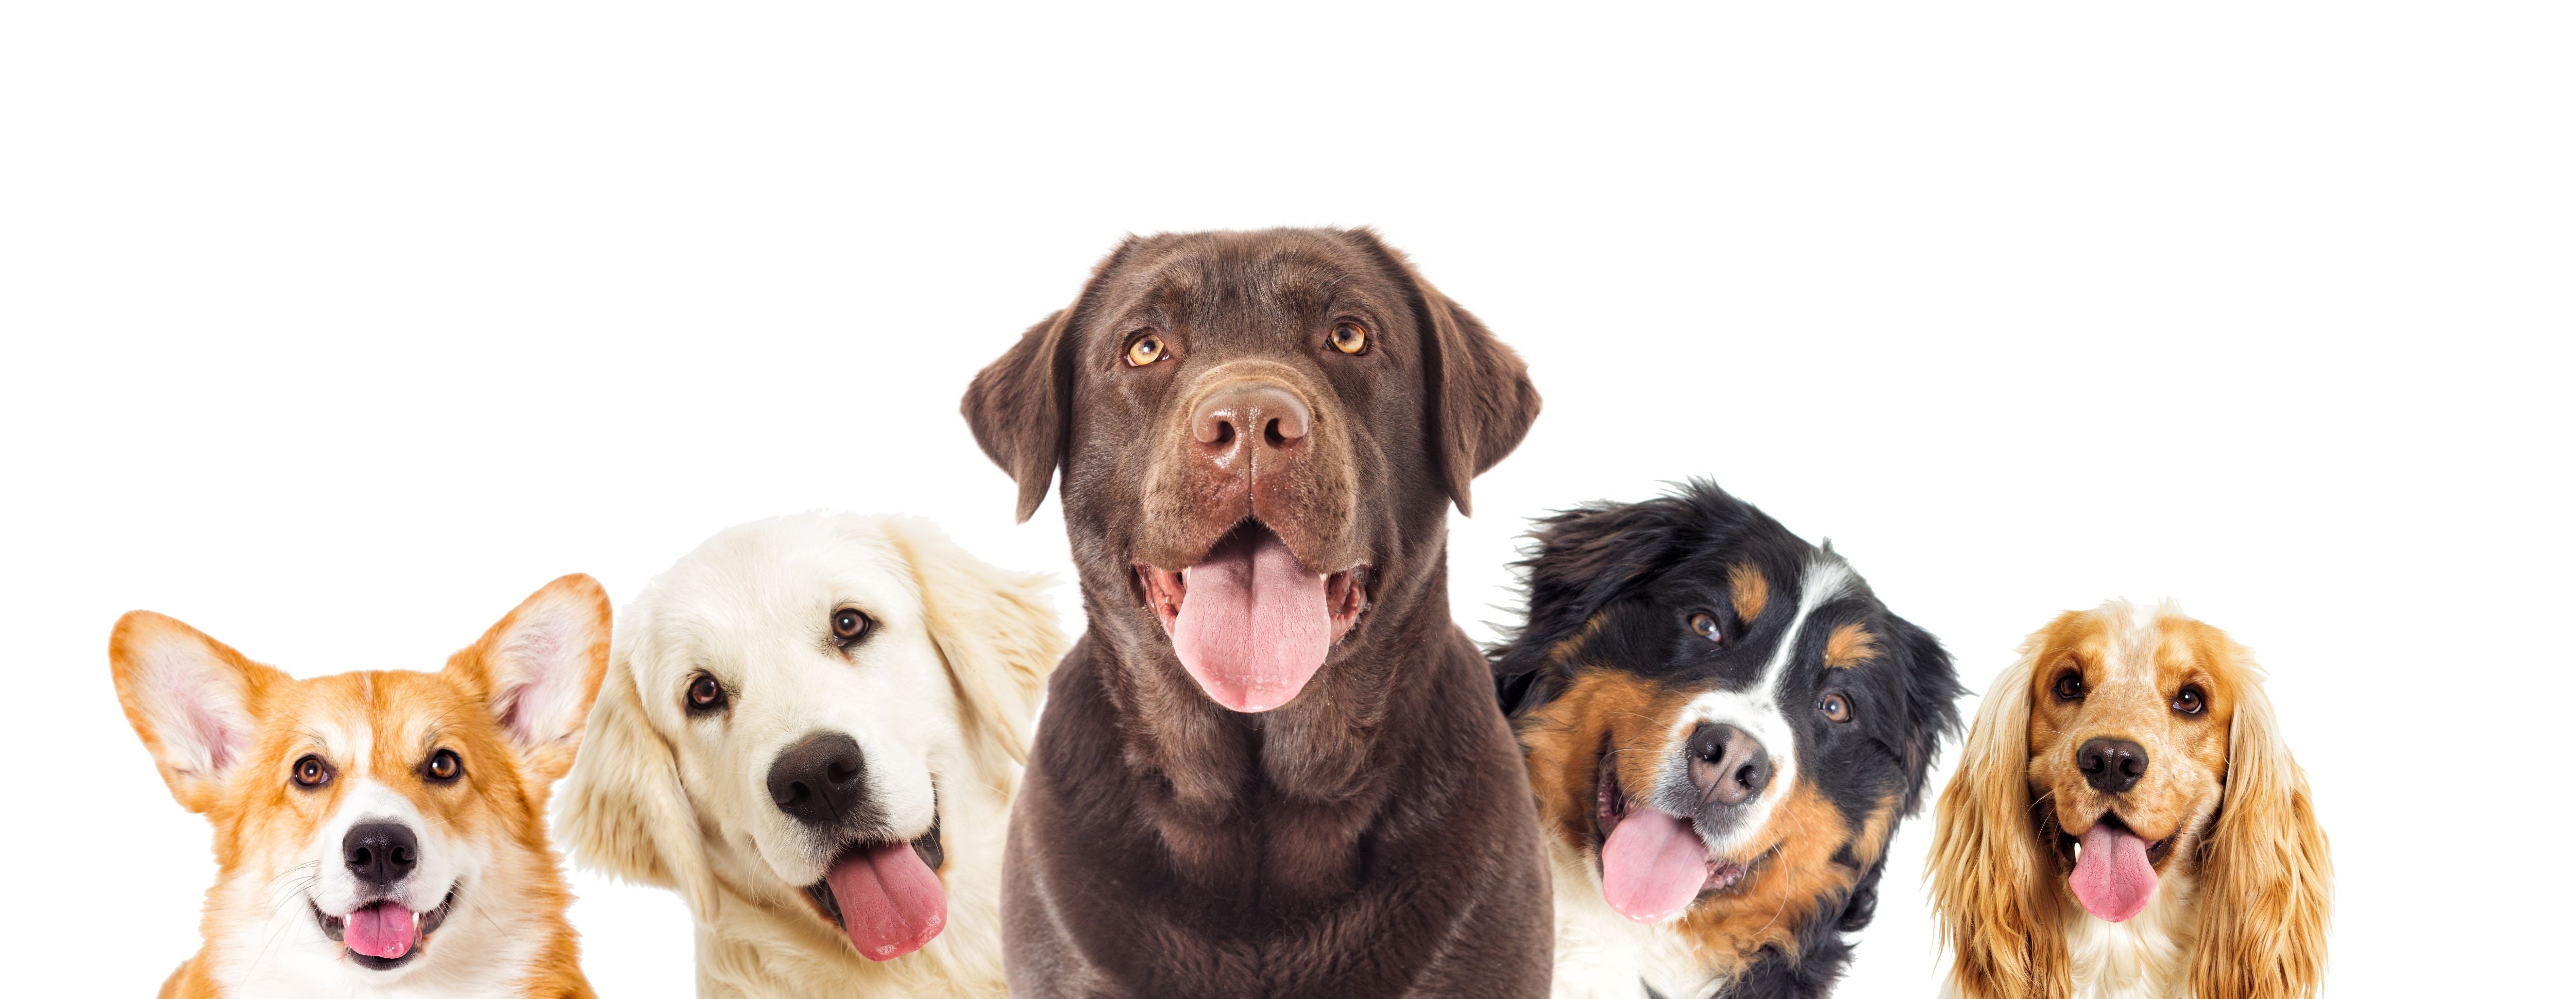 Which dog breeds are more at risk of occasional joint stiffness?